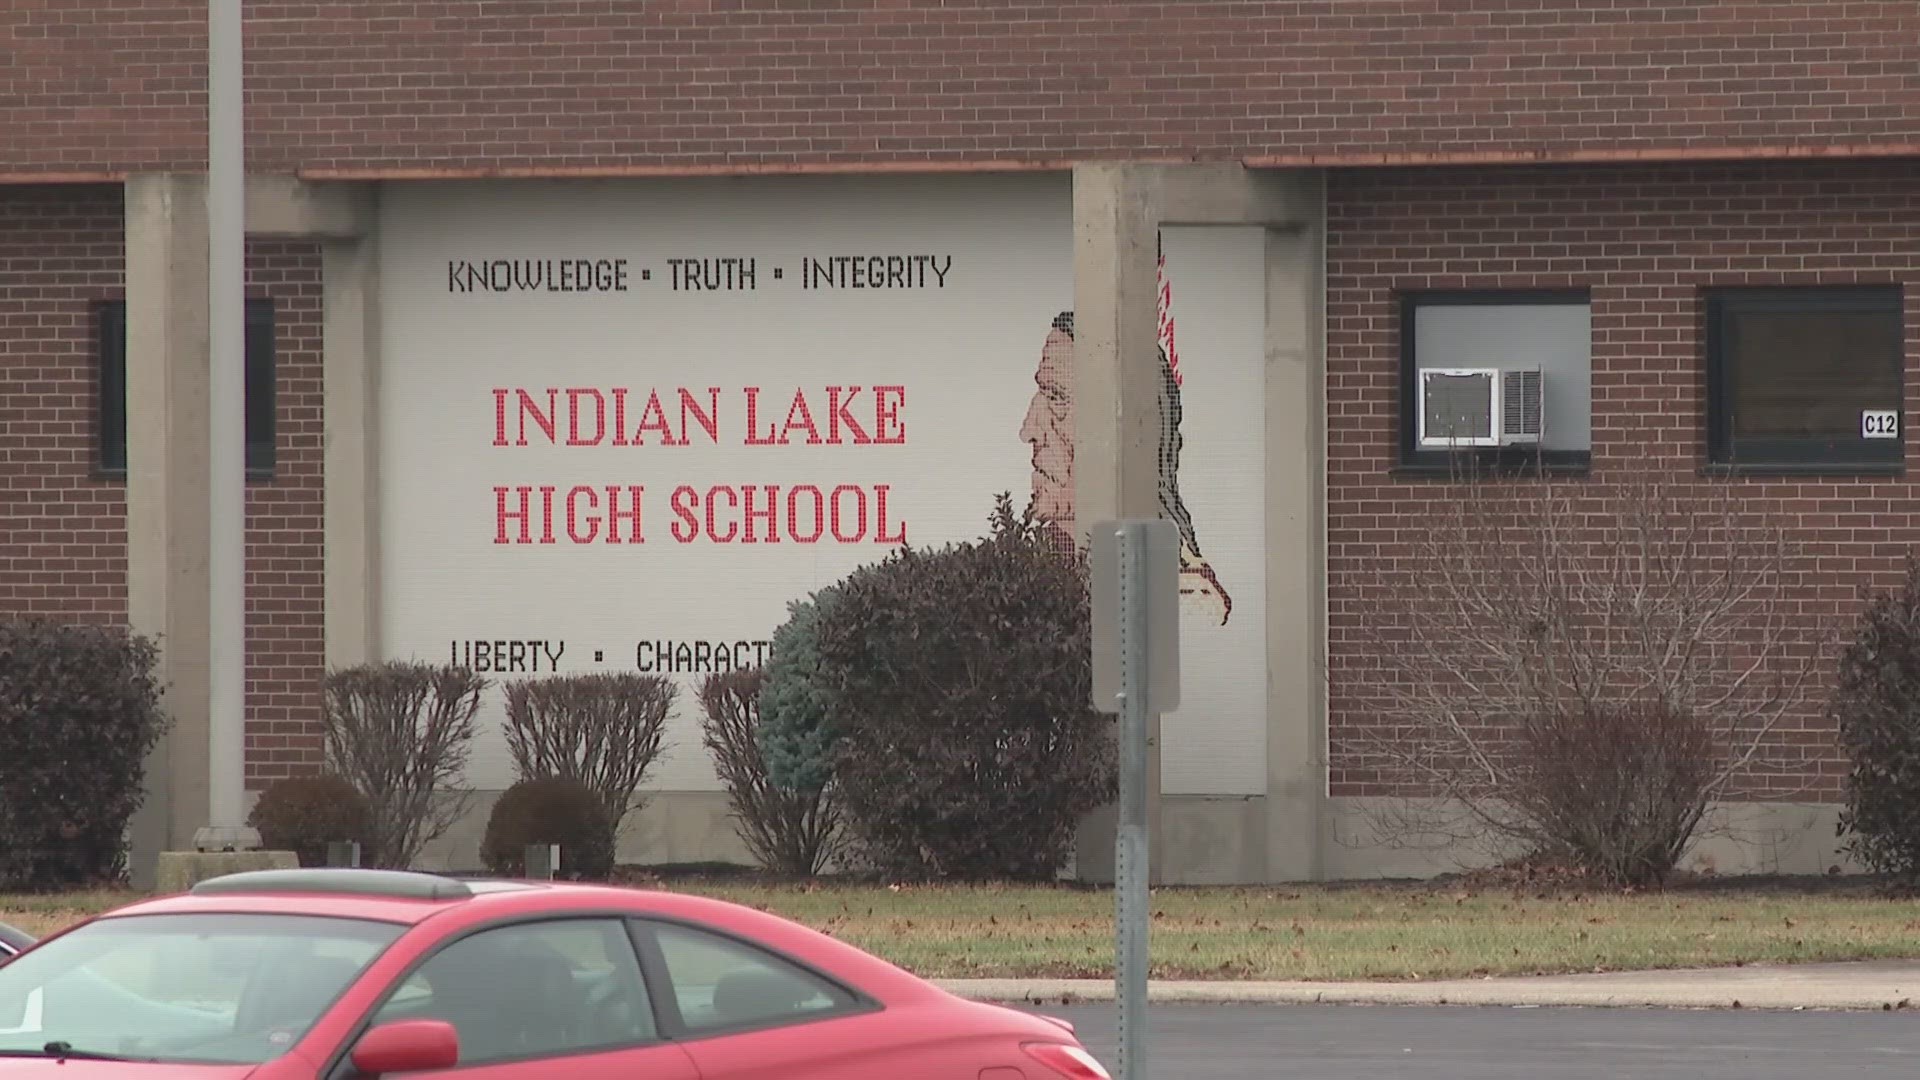 Indian Lake Schools and surrounding community members are mourning the loss of 17-year-old Chloe Hodge, who was killed in a car crash last Thursday.